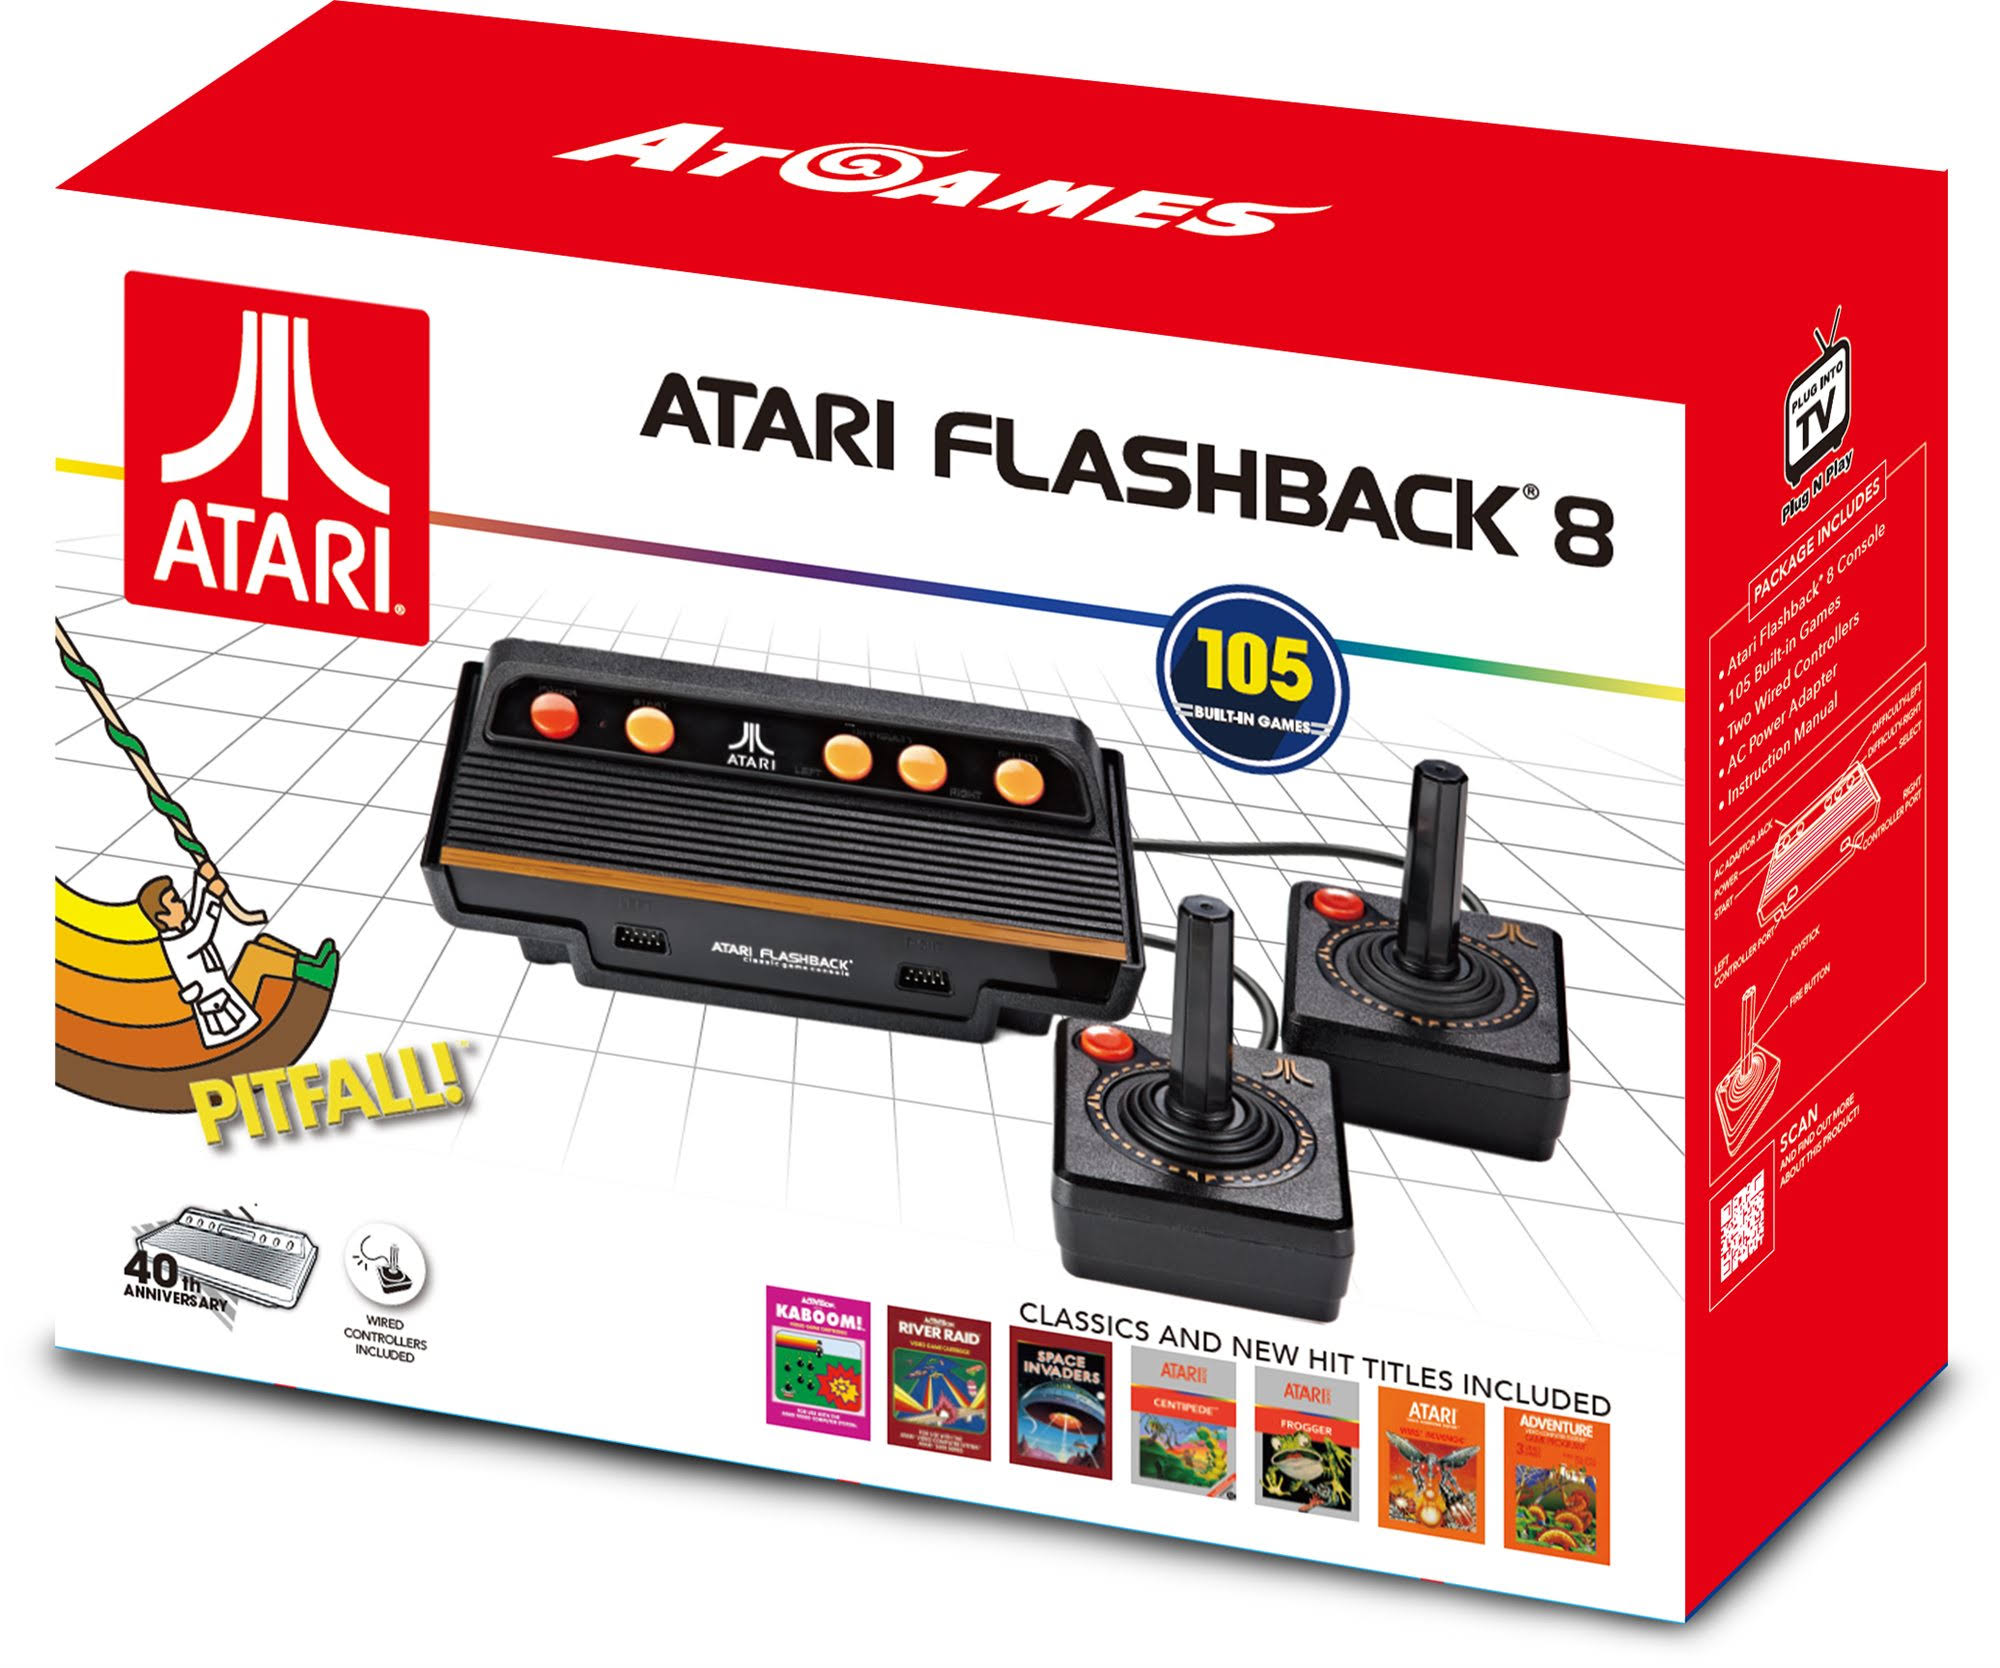 Atari Flashback 8 Classic Gaming Console with 105 Games